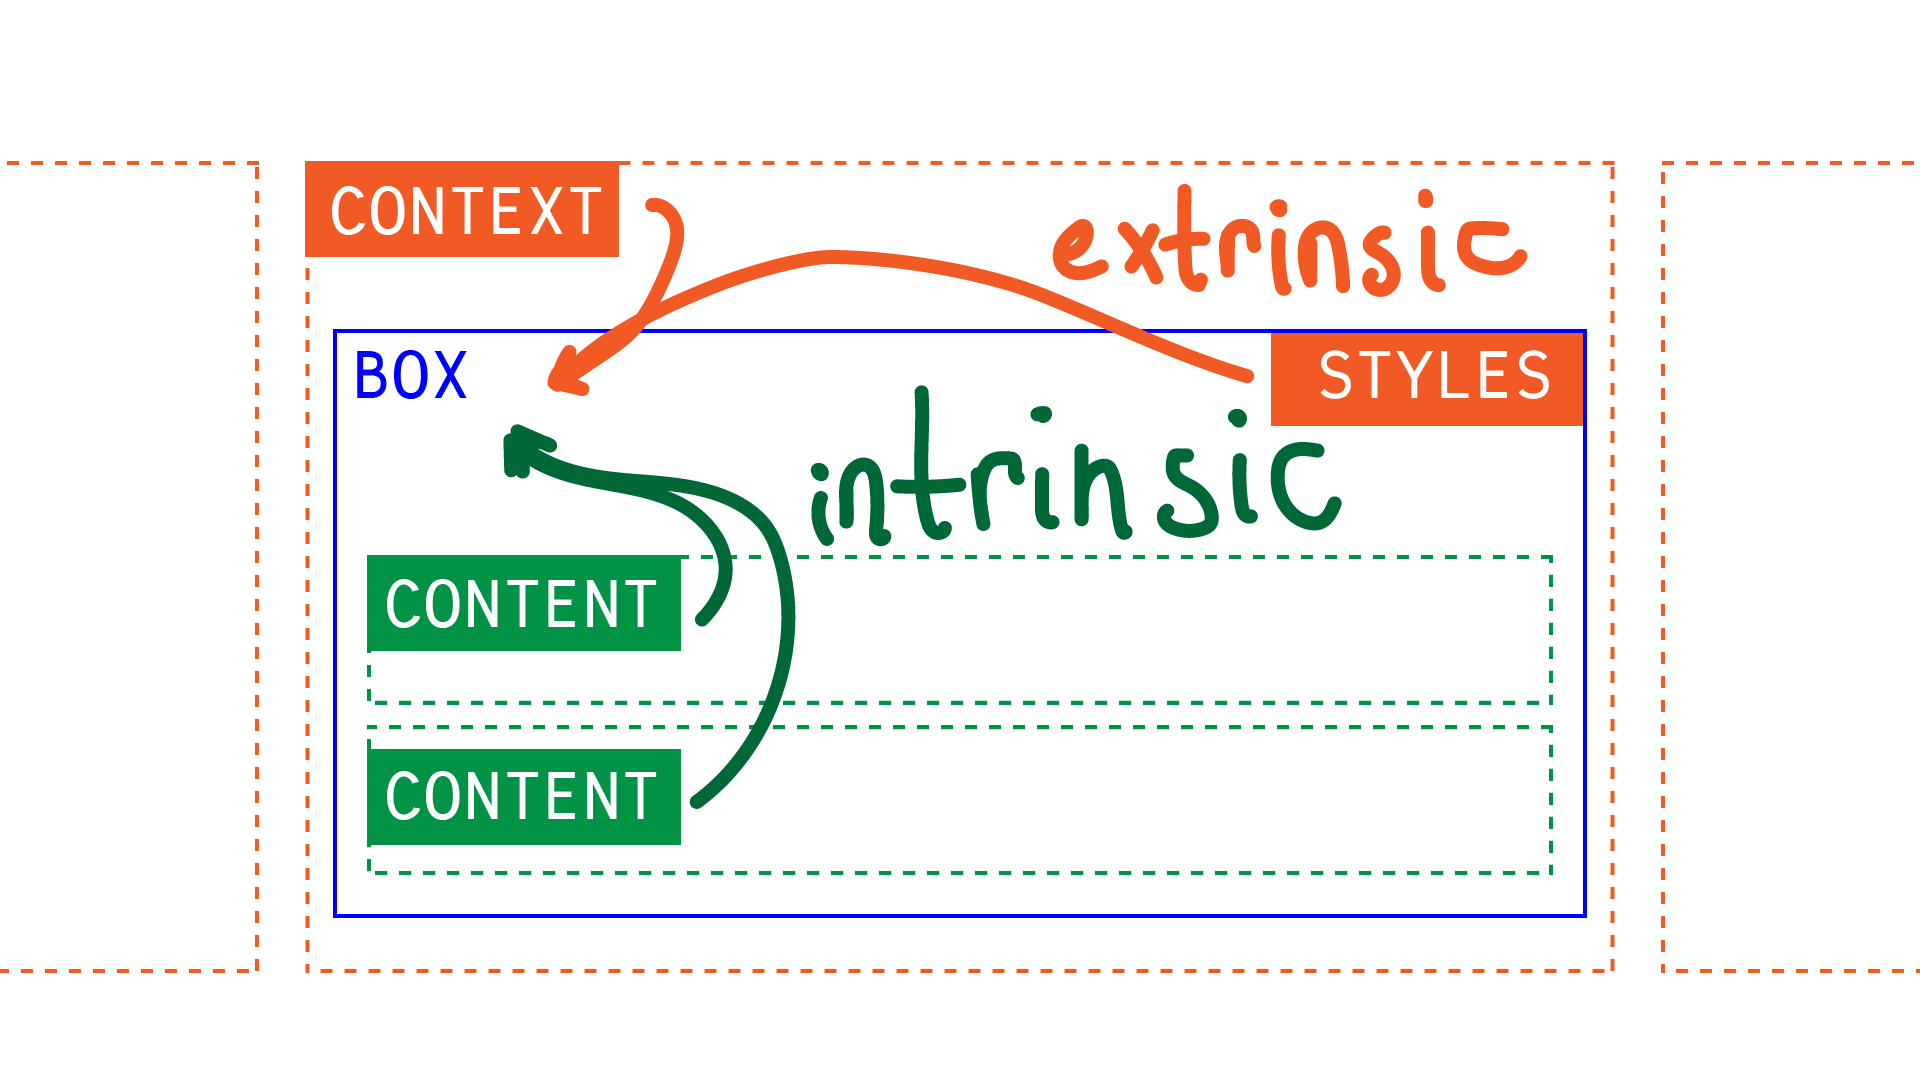 Parent box labeled 'context', and styles from the box itself provide 'explicit' sizing to the box
